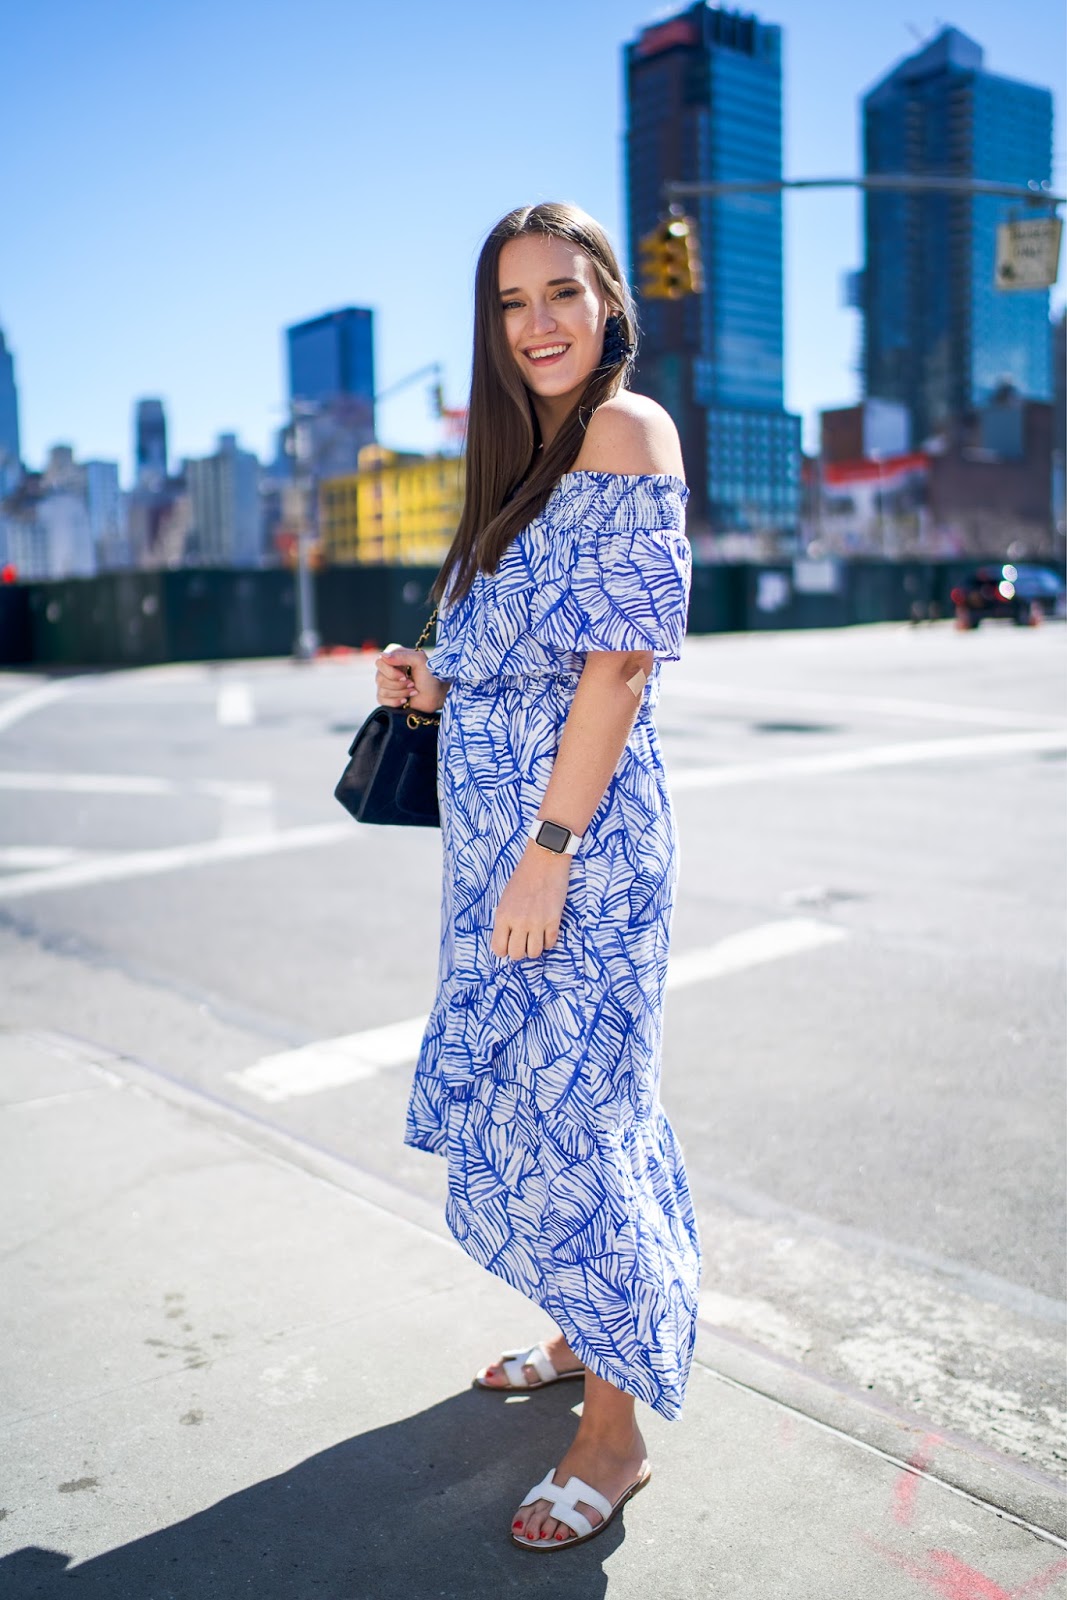 Banana Leaf Dress For Spring by popular New York fashion blogger Covering the Bases